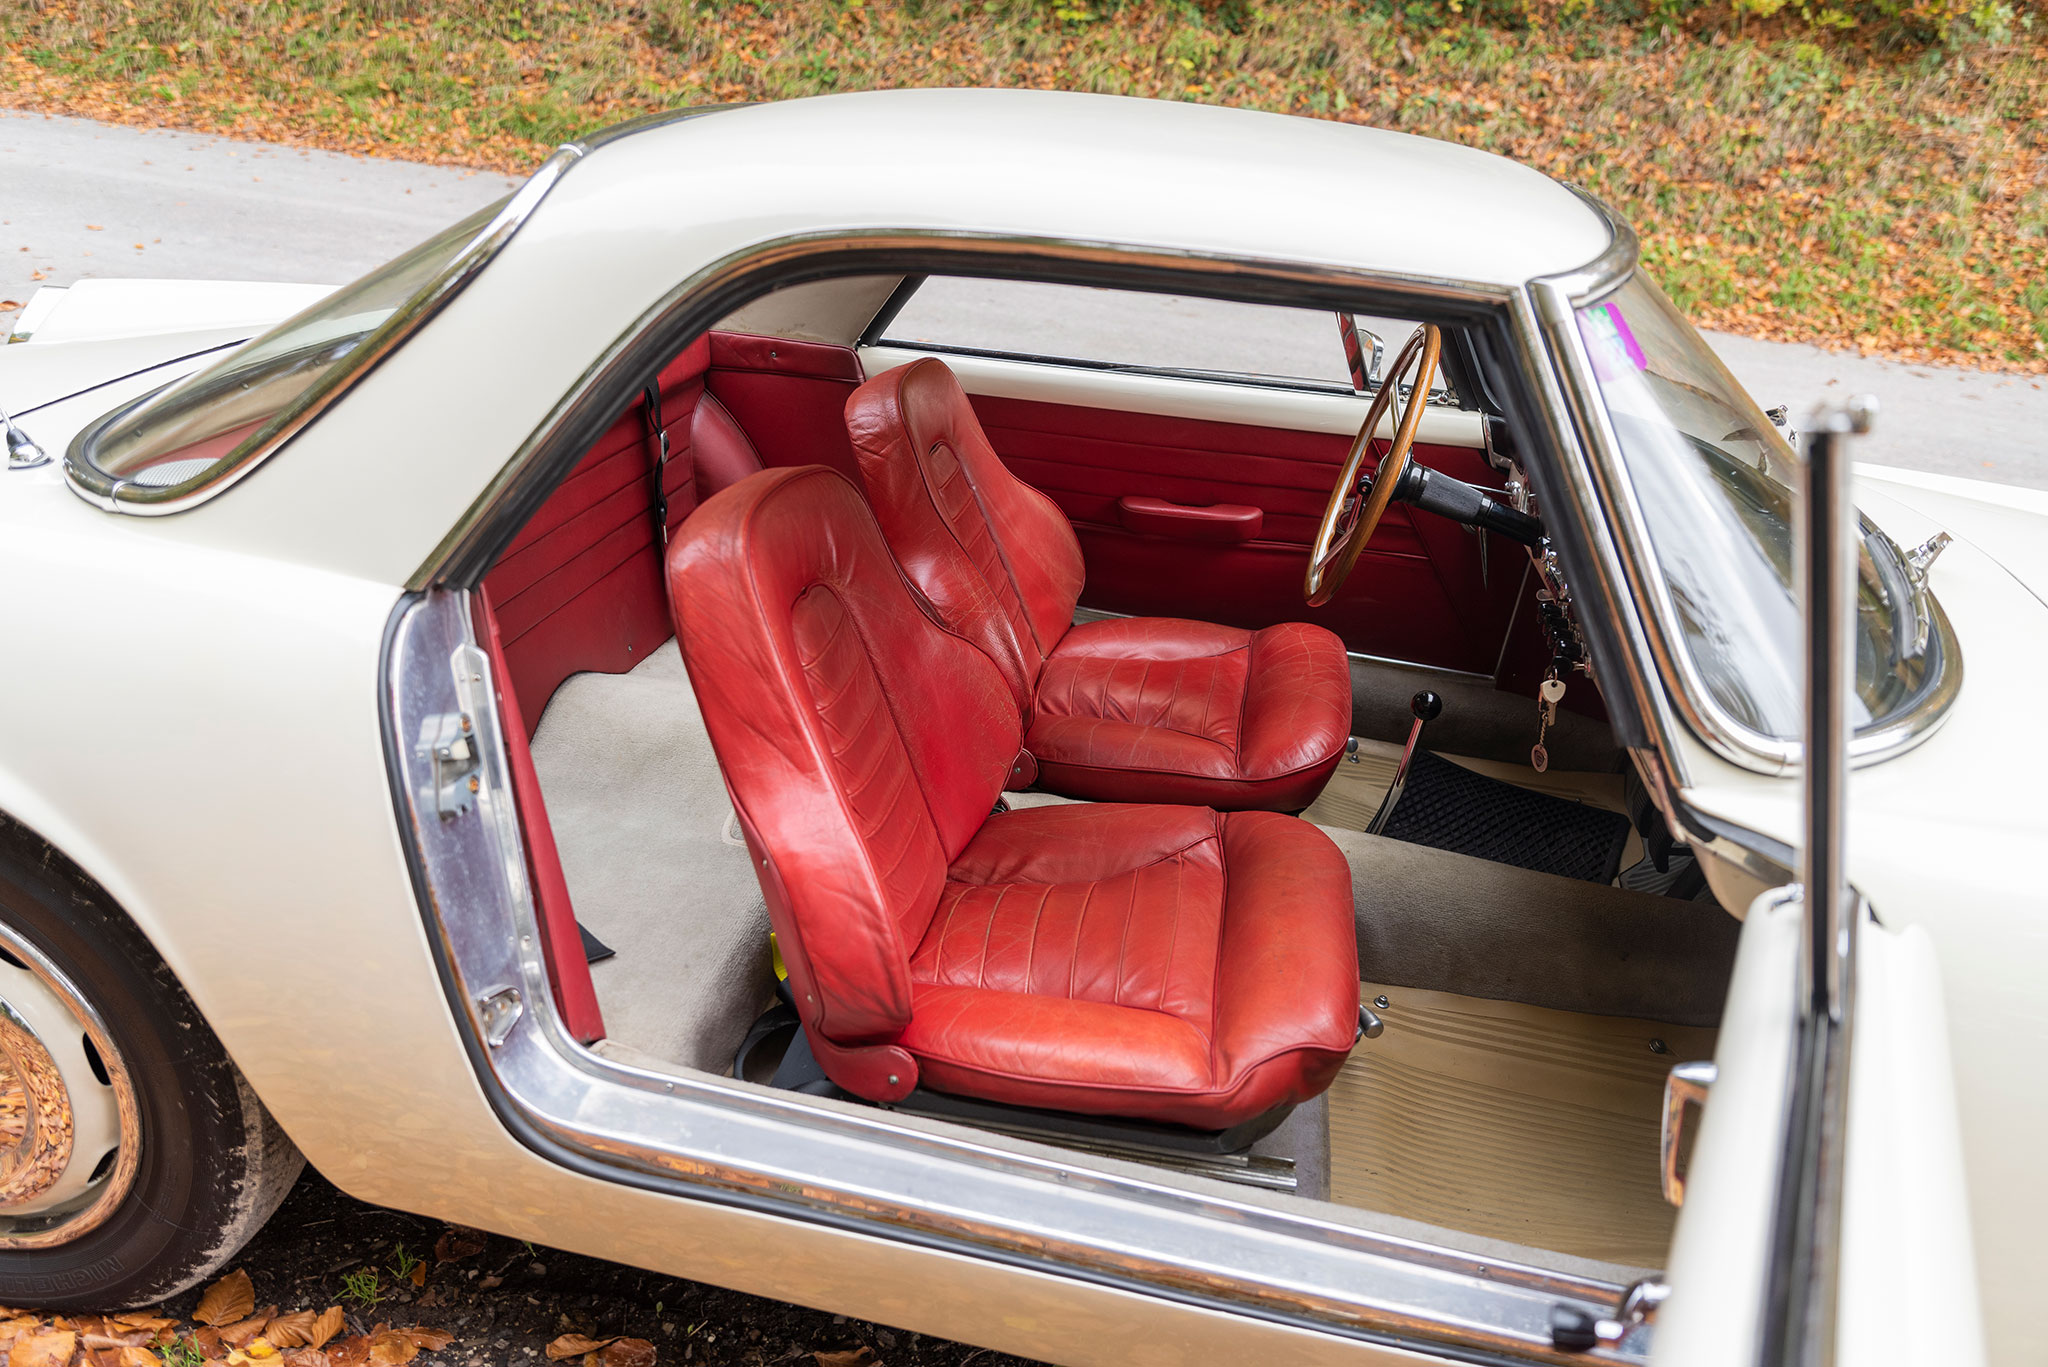 1961 Lancia Flaminia 2500 GT Touring blanche, cuir rouge, moquette grise.